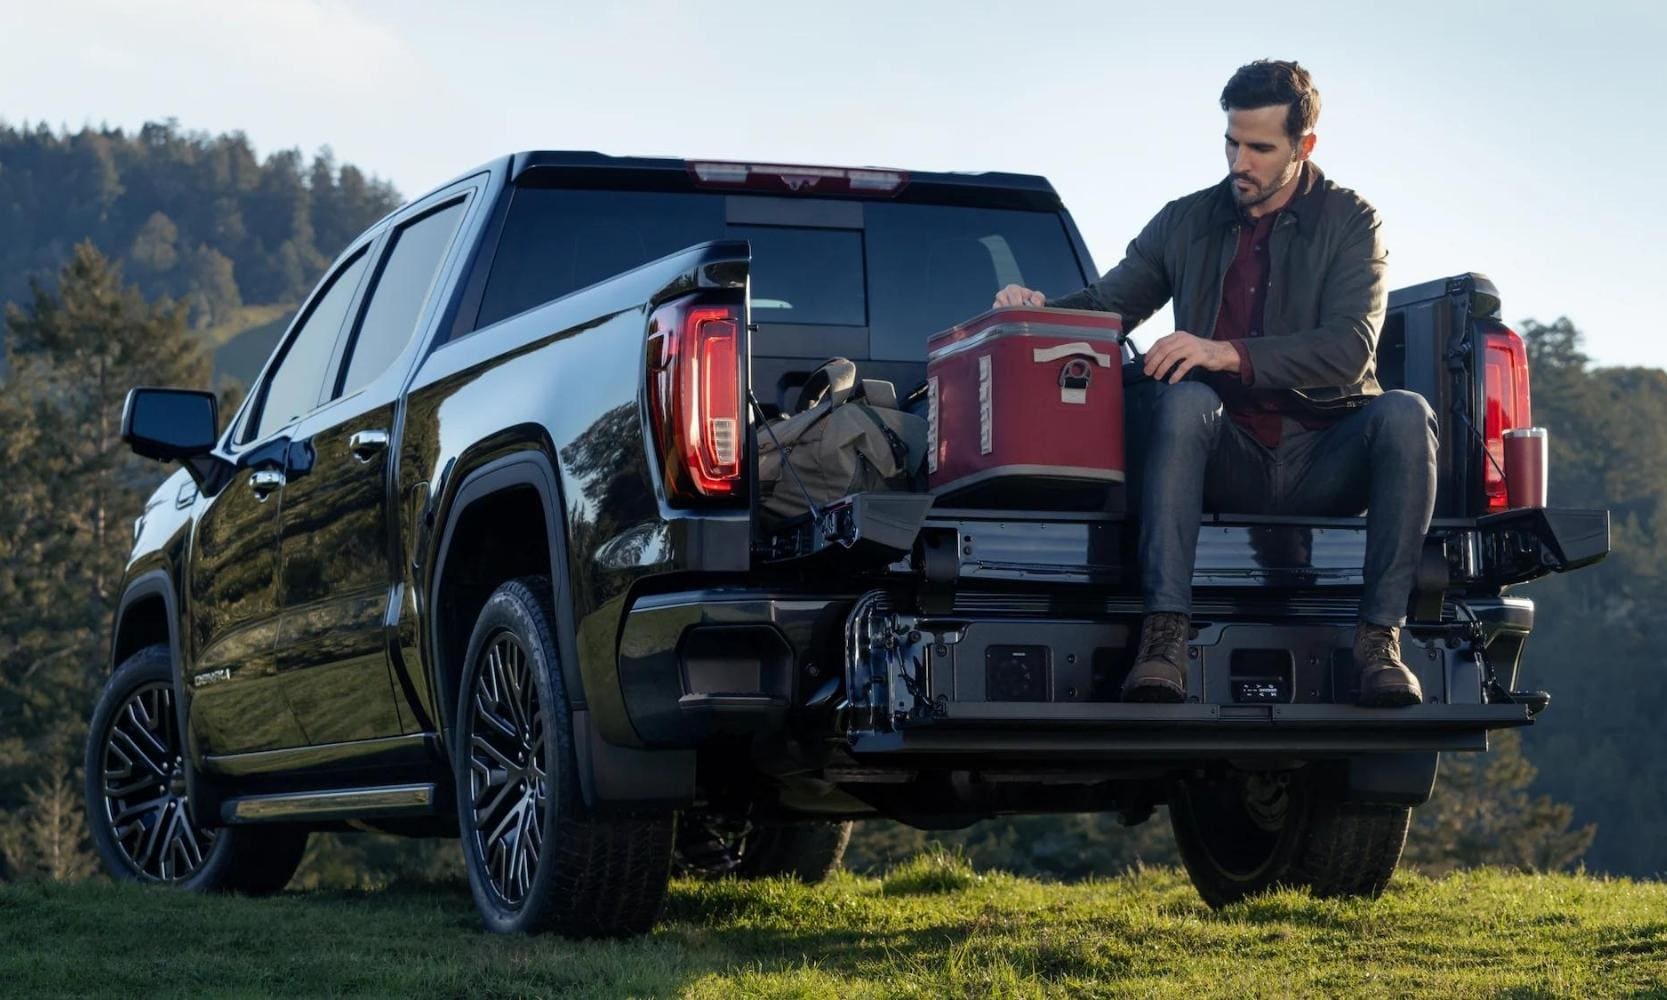 2022 GMC Sierra 1500 Denali Ultimate multipro tailgate in use by the driver